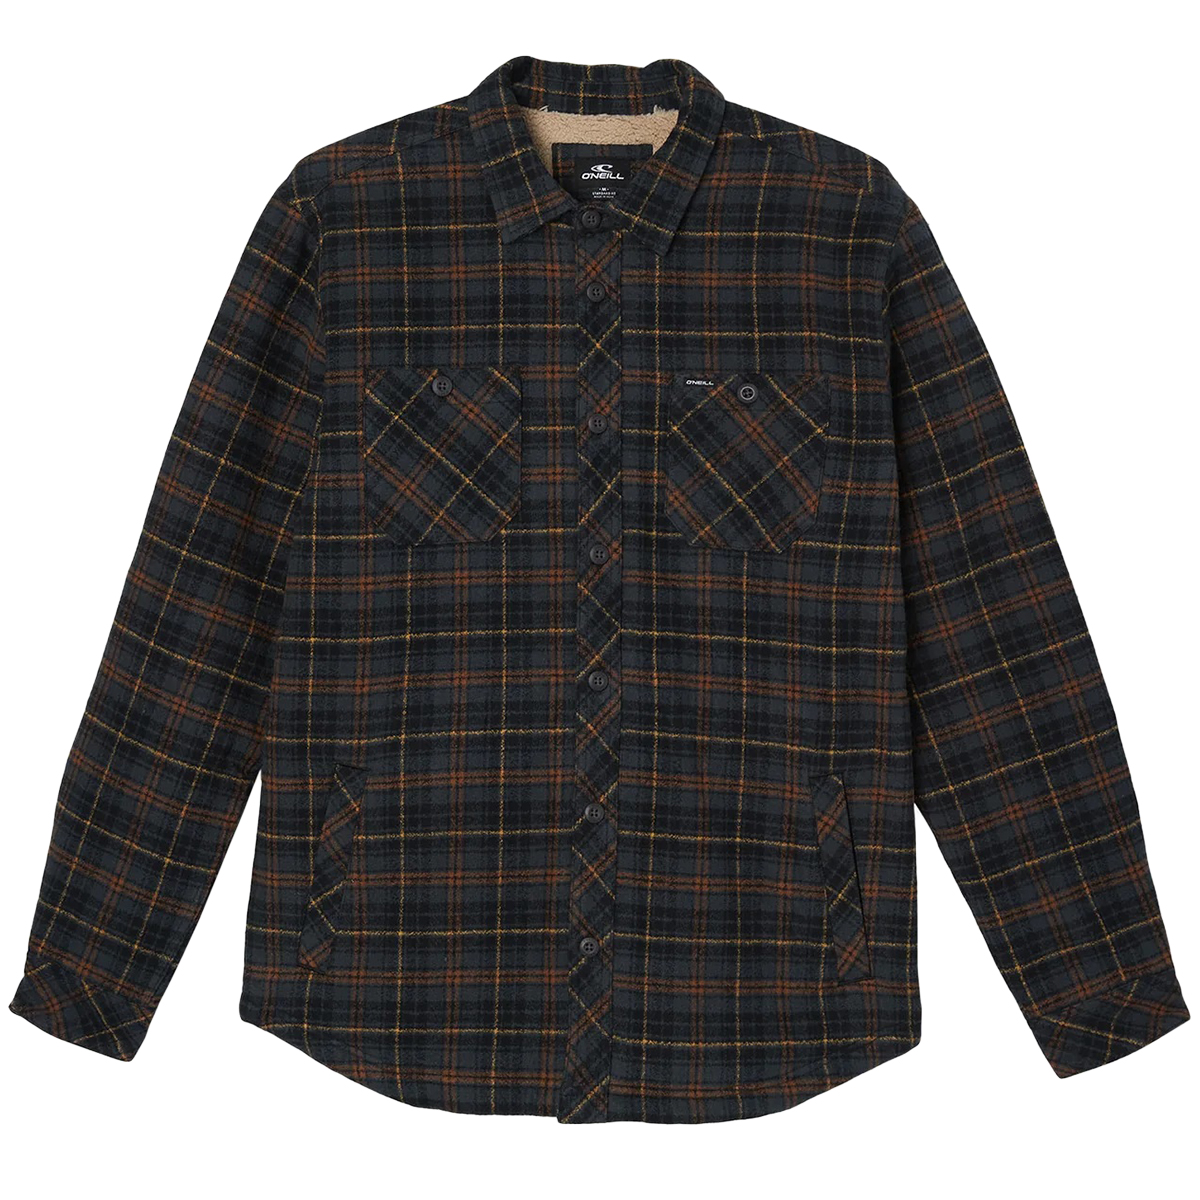 O'neill Young Men's Redmond Sherpa-Lined Flannel